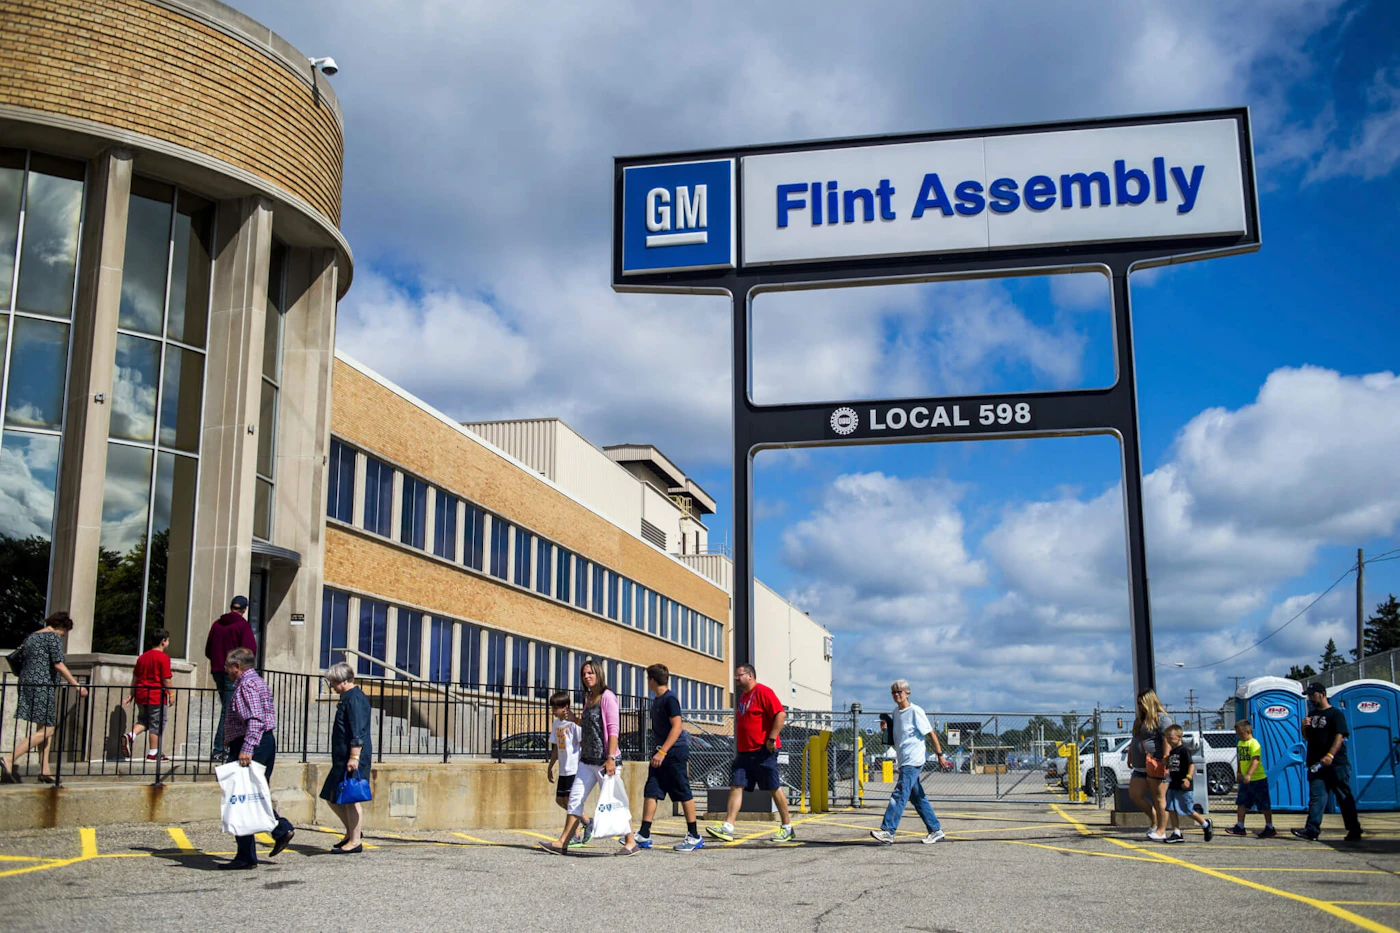 People arrive at the Flint Assembly Plant for a free tour and open house, Aug. 11, 2015, in Flint, Mich. General Motors plans to invest more than $1 billion in two Flint, Michigan manufacturing plants for the production of the next-generation internal combustion engine heavy-duty trucks. Gerald Johnson, executive vice president, Global Manufacturing and Sustainability, said Monday, June 5, 2023 that the company will build internal combustion vehicles throughout this decade, in addition to making electric vehicles. ( Jake May/The Flint Journal via AP)